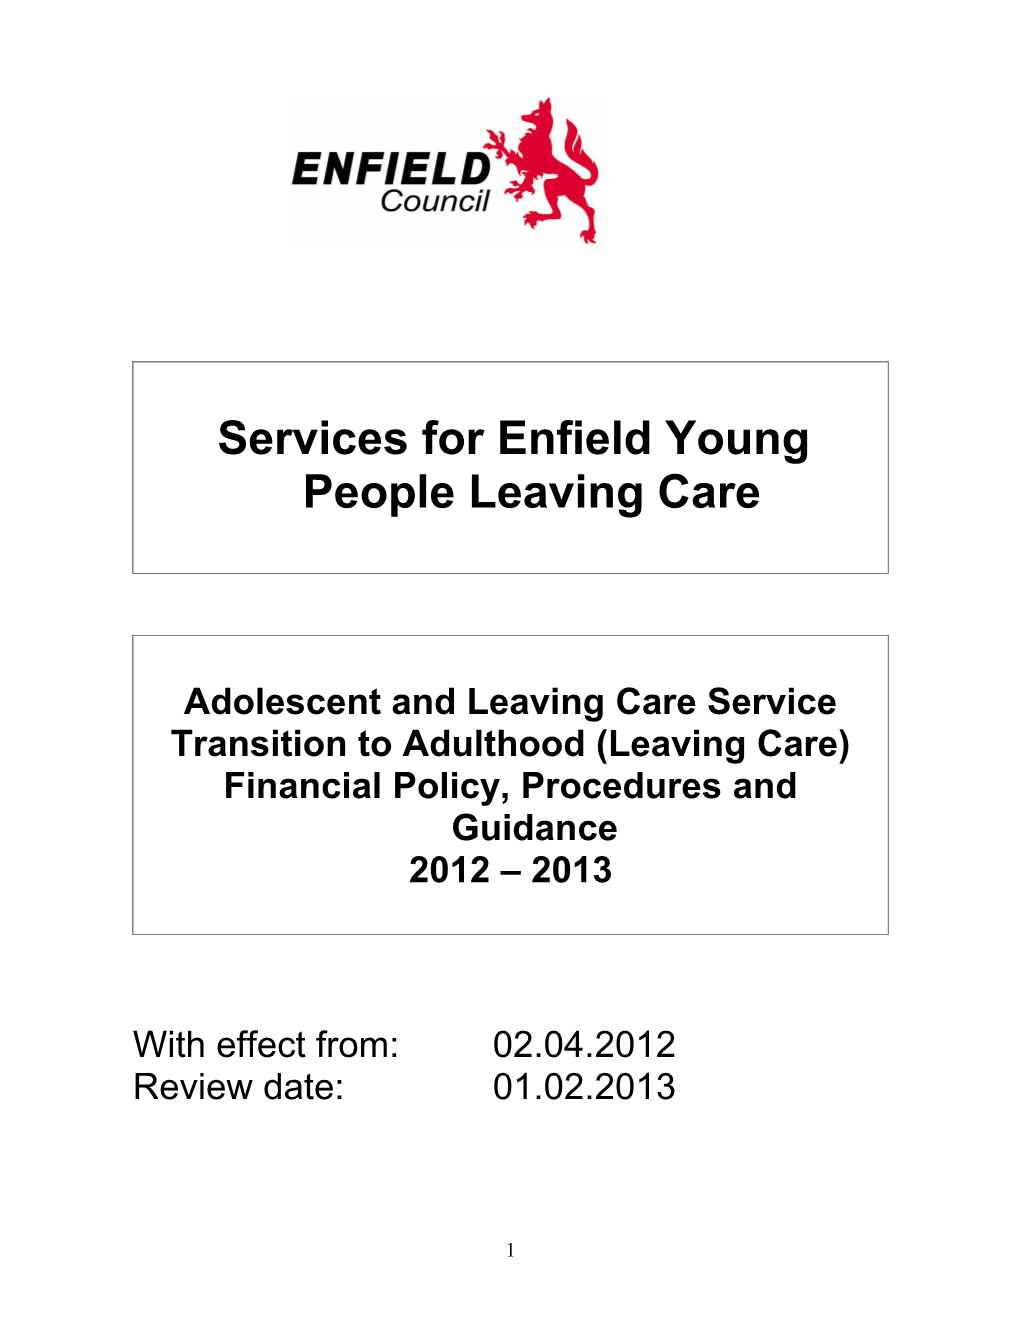 Leaving Care Finance Policy